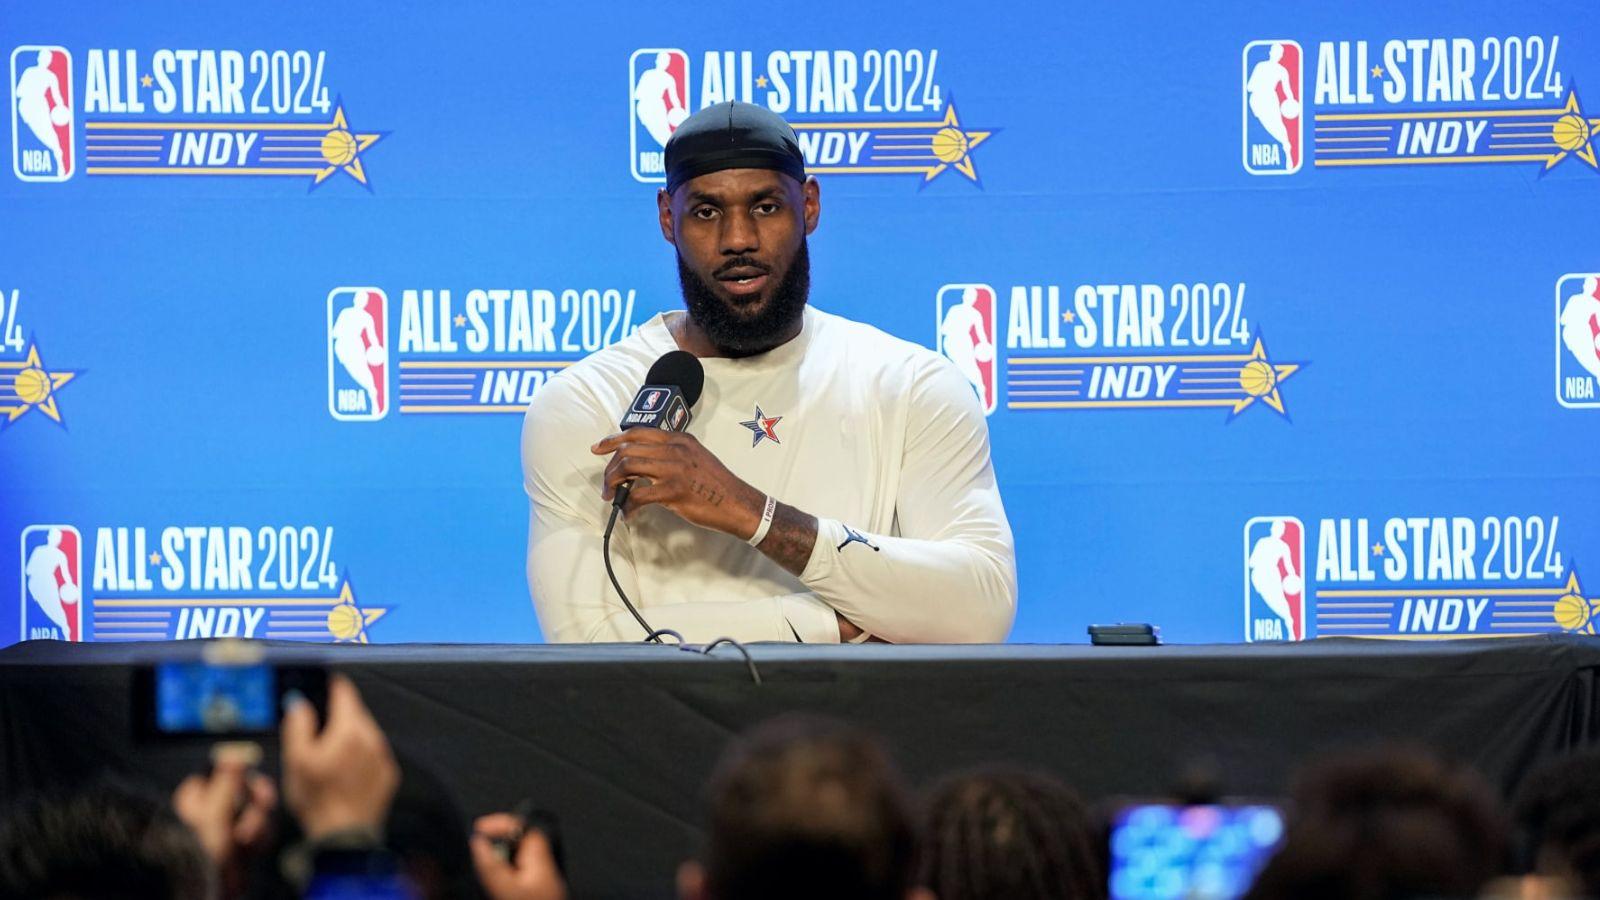 LeBron James speaks at 2024 All-Star Game press conference.